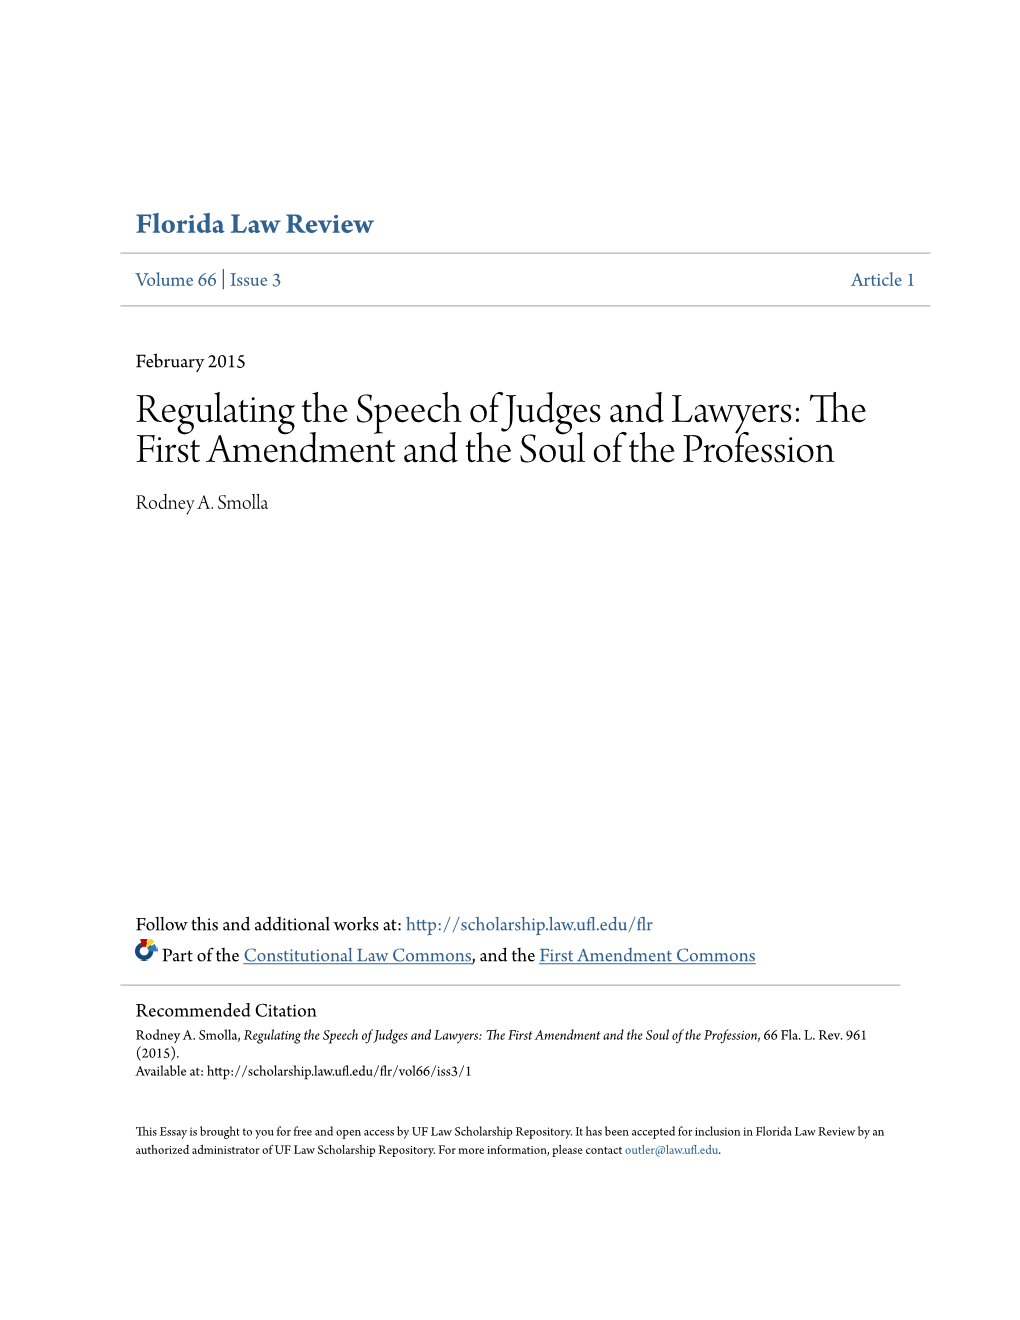 Regulating the Speech of Judges and Lawyers: the First Amendment and the Soul of the Profession Rodney A